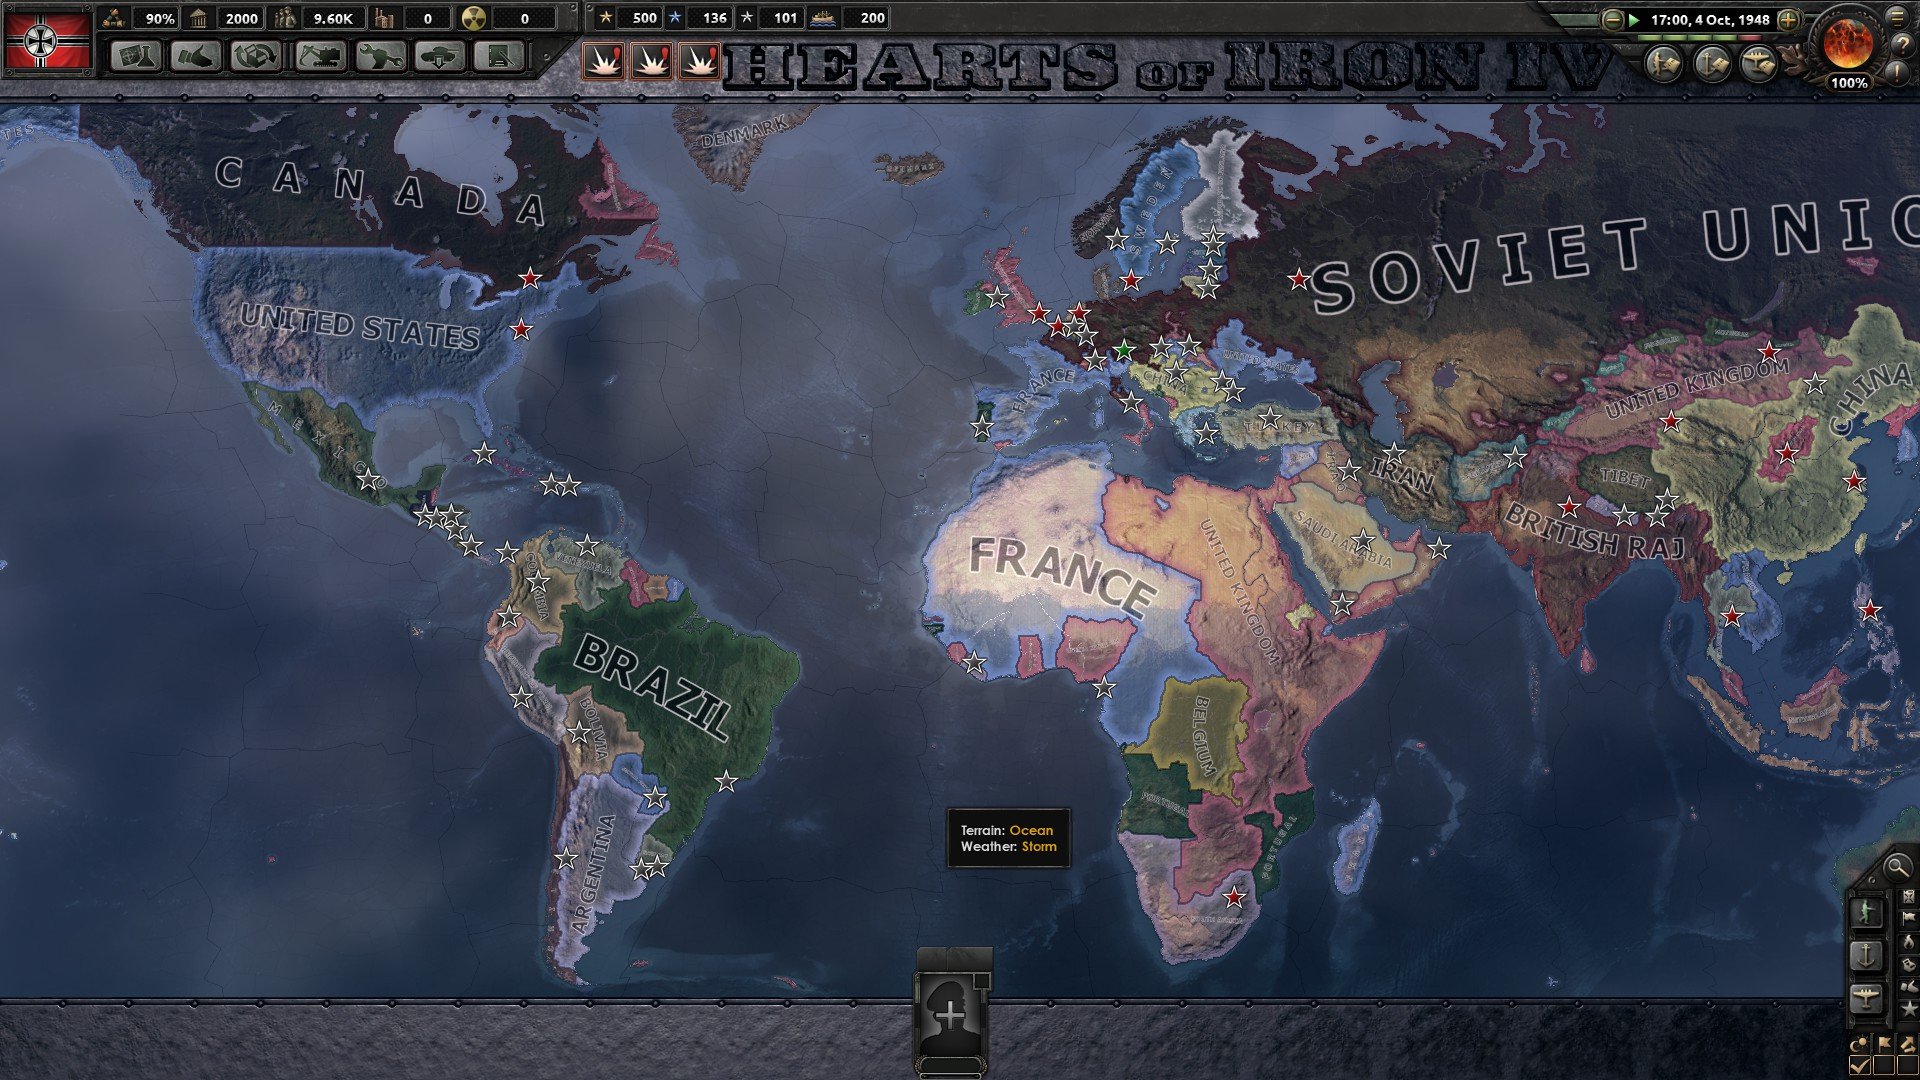 World War: Wage war across the surface of the Earth in HoI4.